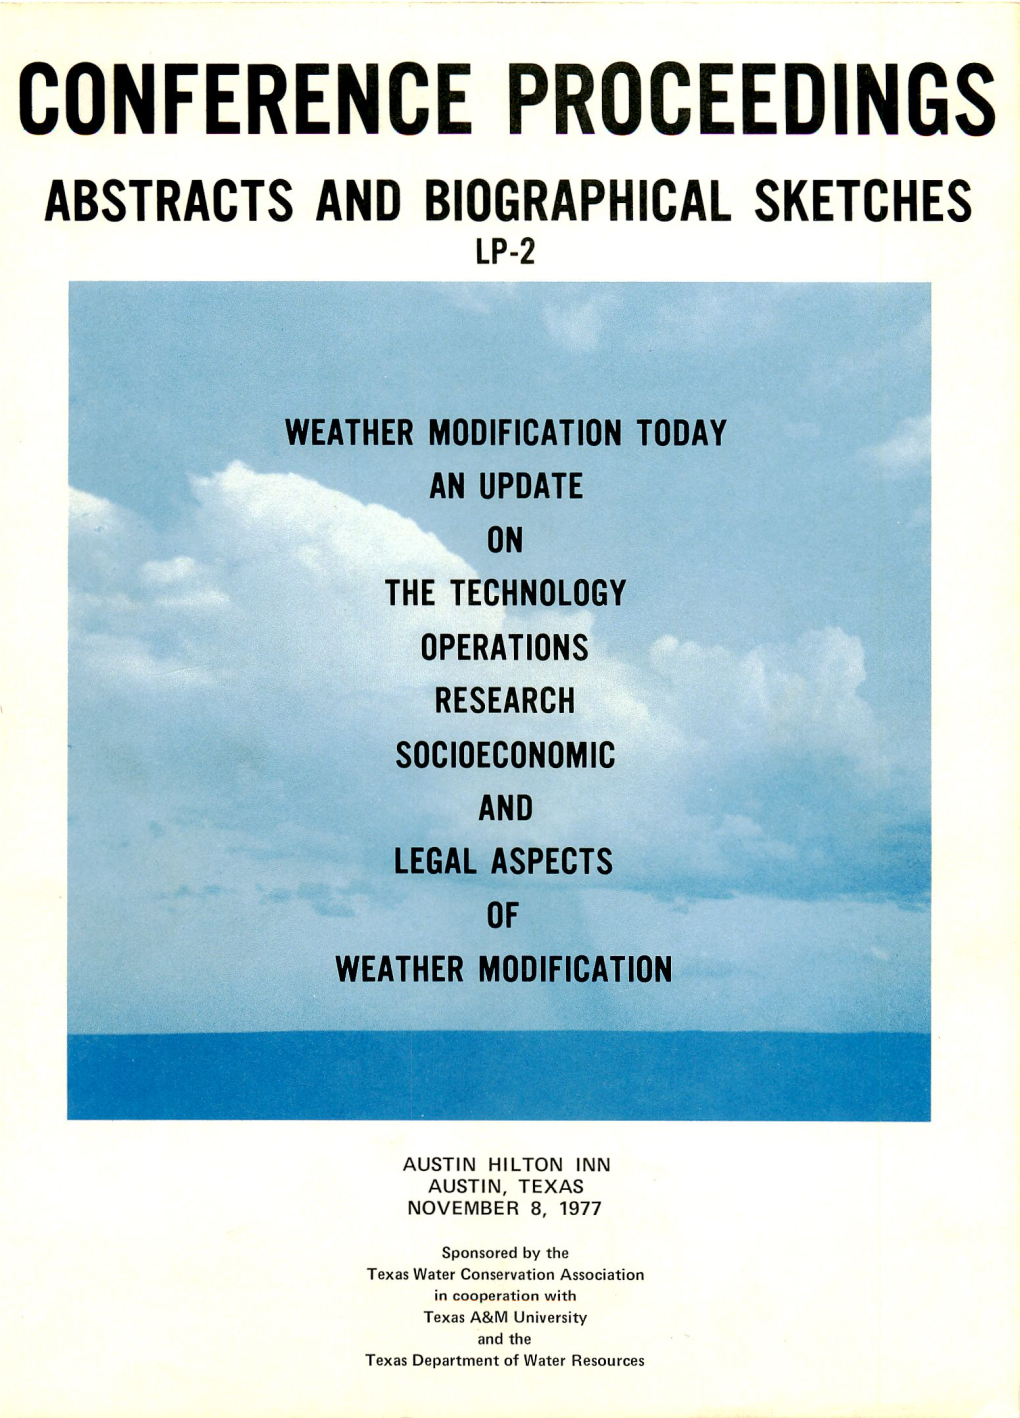 Weather Modification Today